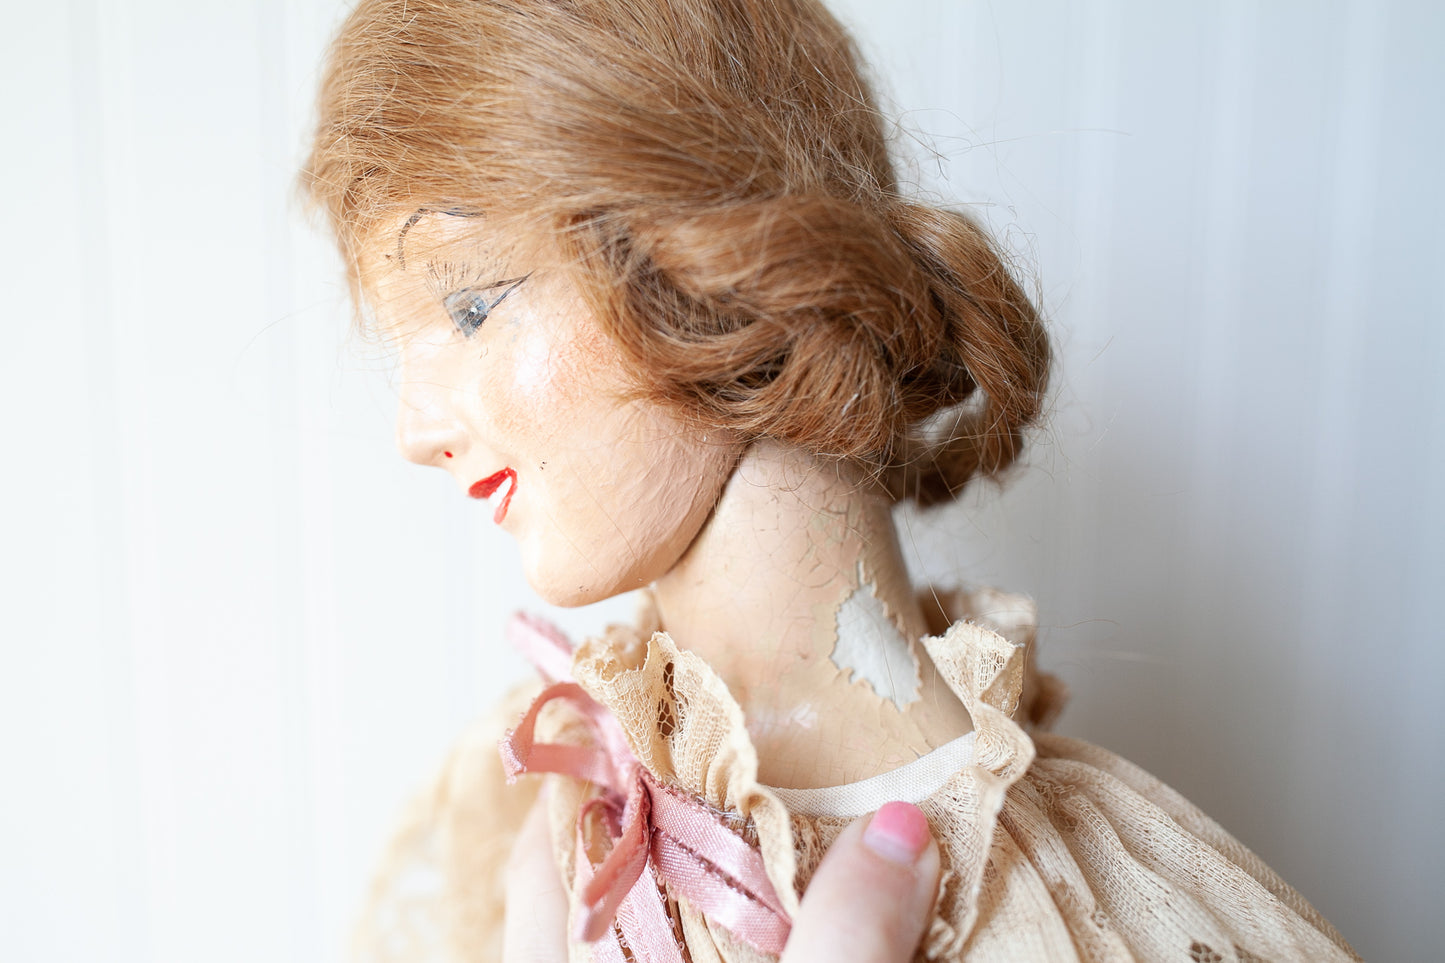 The Happy Sister- Antique Doll - Boudoir Doll